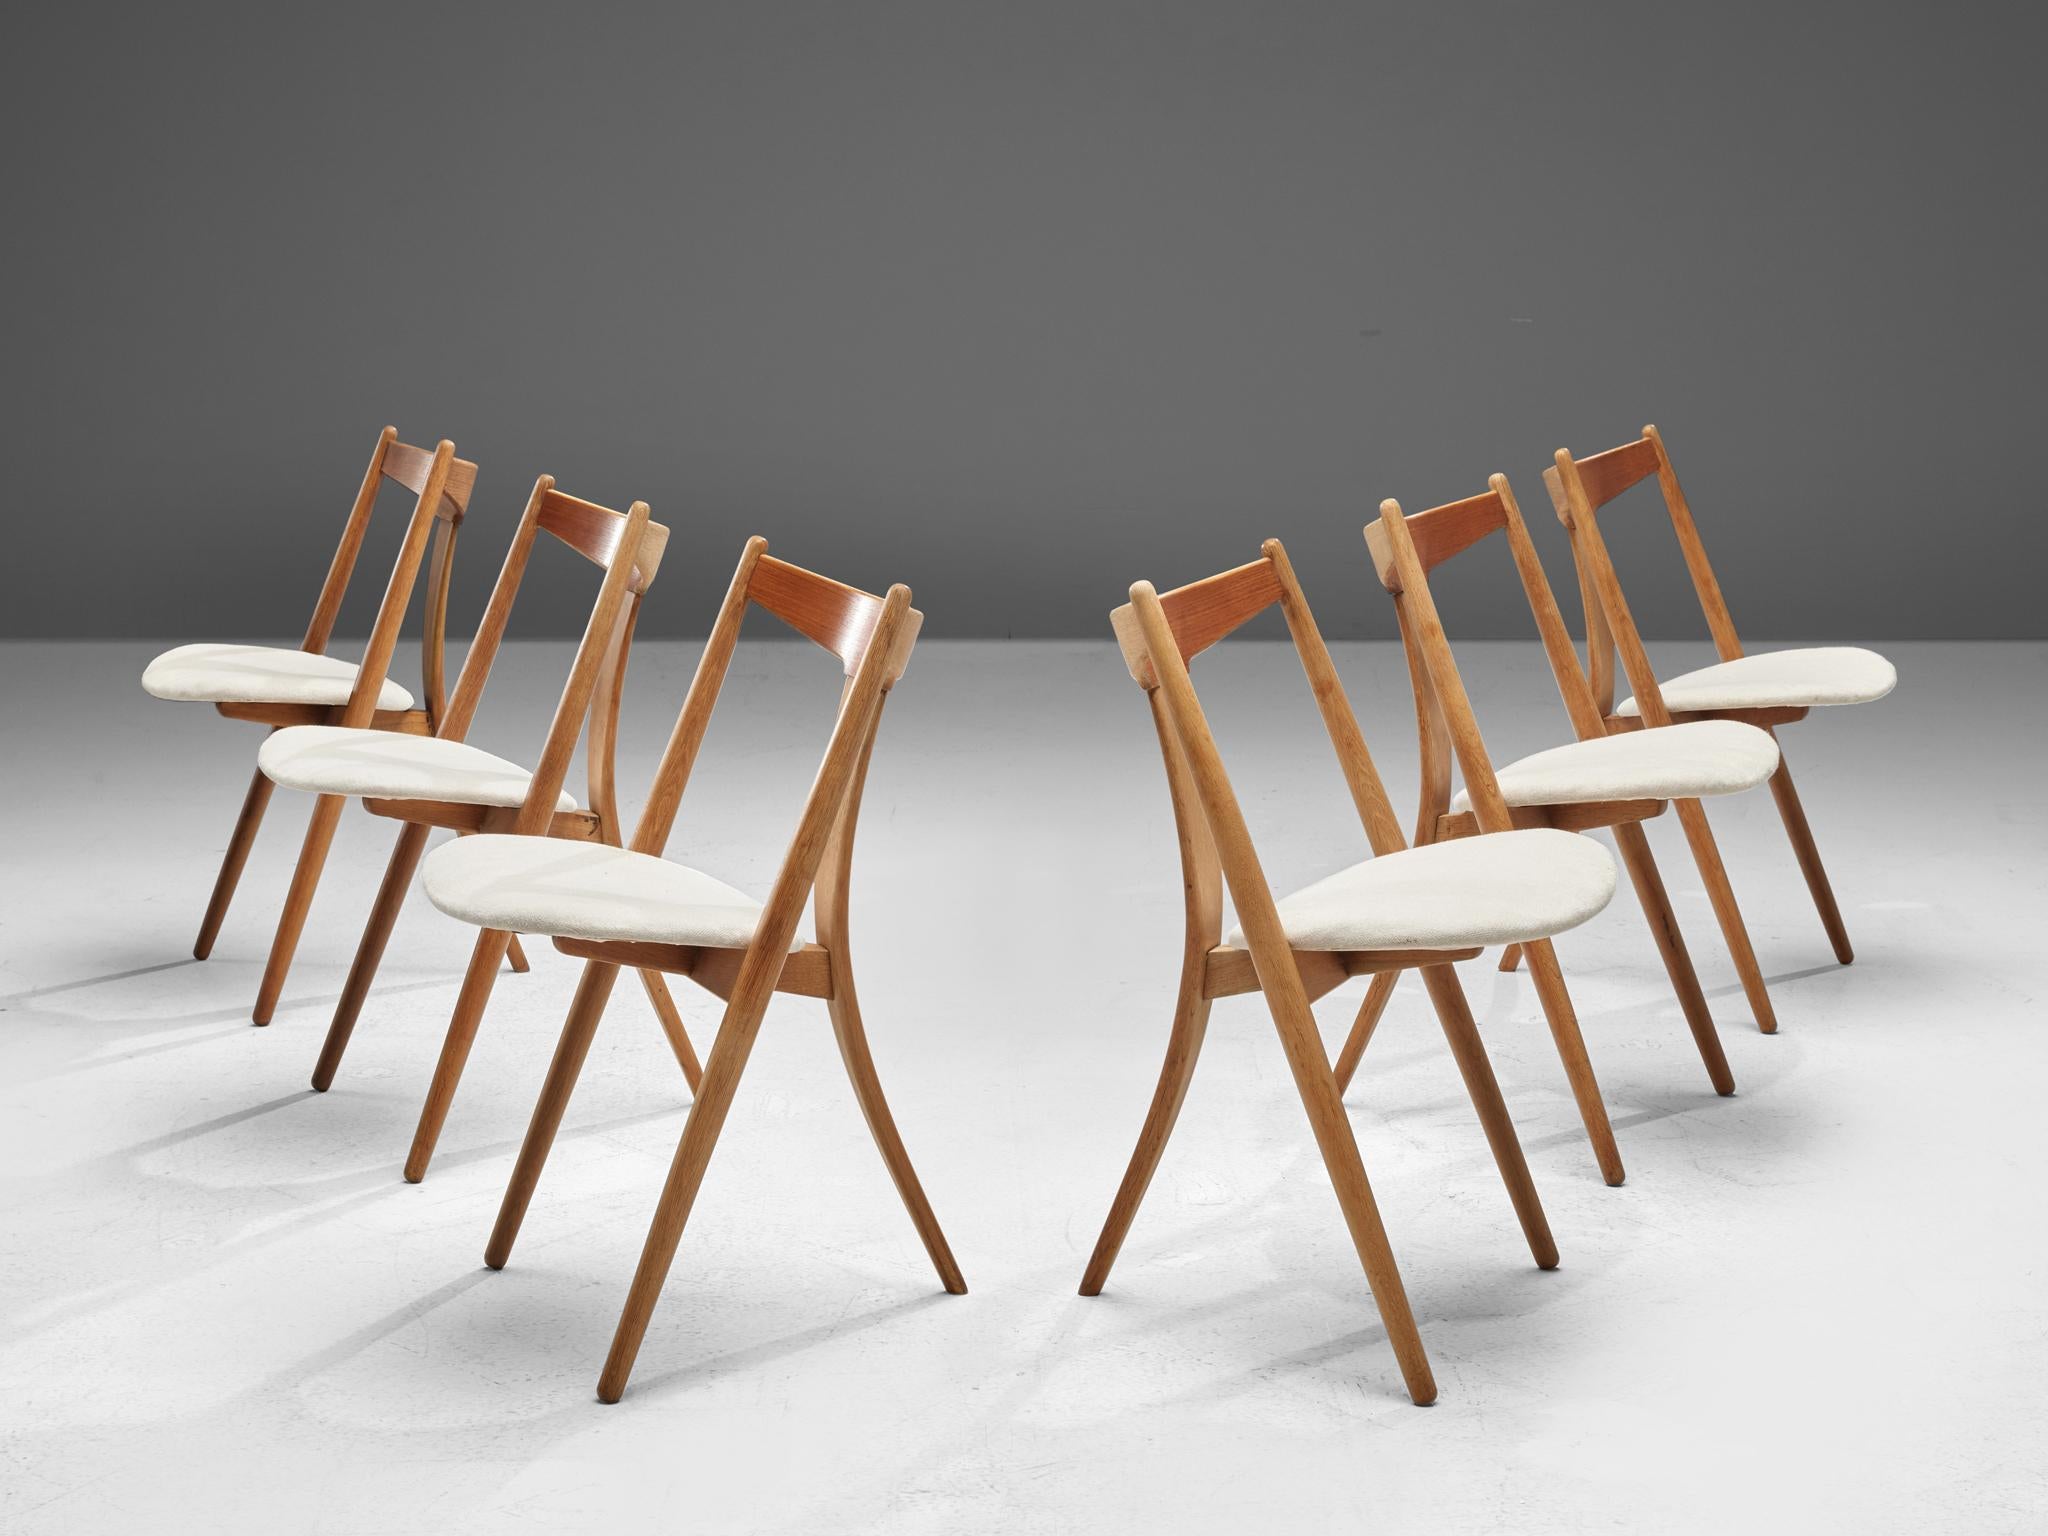 Dining chairs, teak and oak, Denmark, 1950s.

This set of six chairs is made by a cabinetmaker in Denmark. The chairs have a tripod frame made of oak and a backrest executed in teak. The chairs main characteristic is the bent single back leg. The